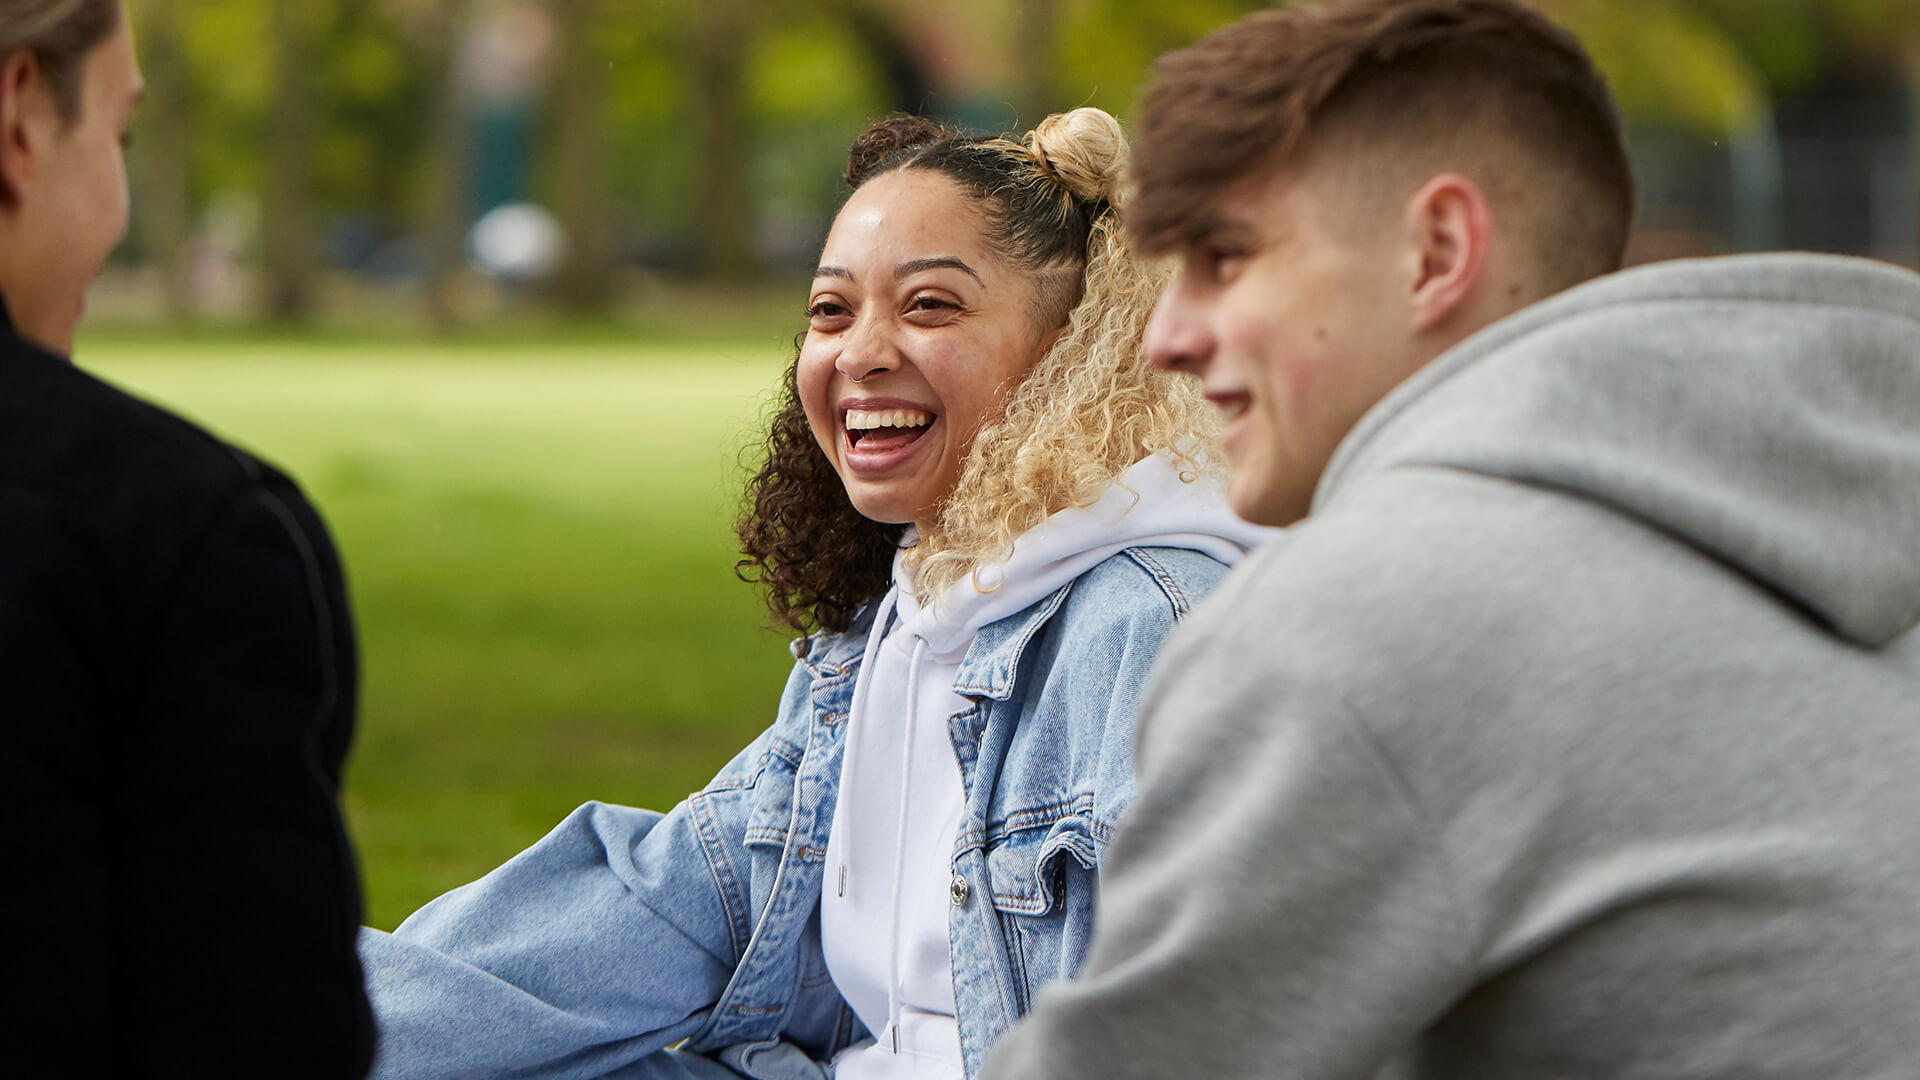 Mental Health Support For Young People | YoungMinds